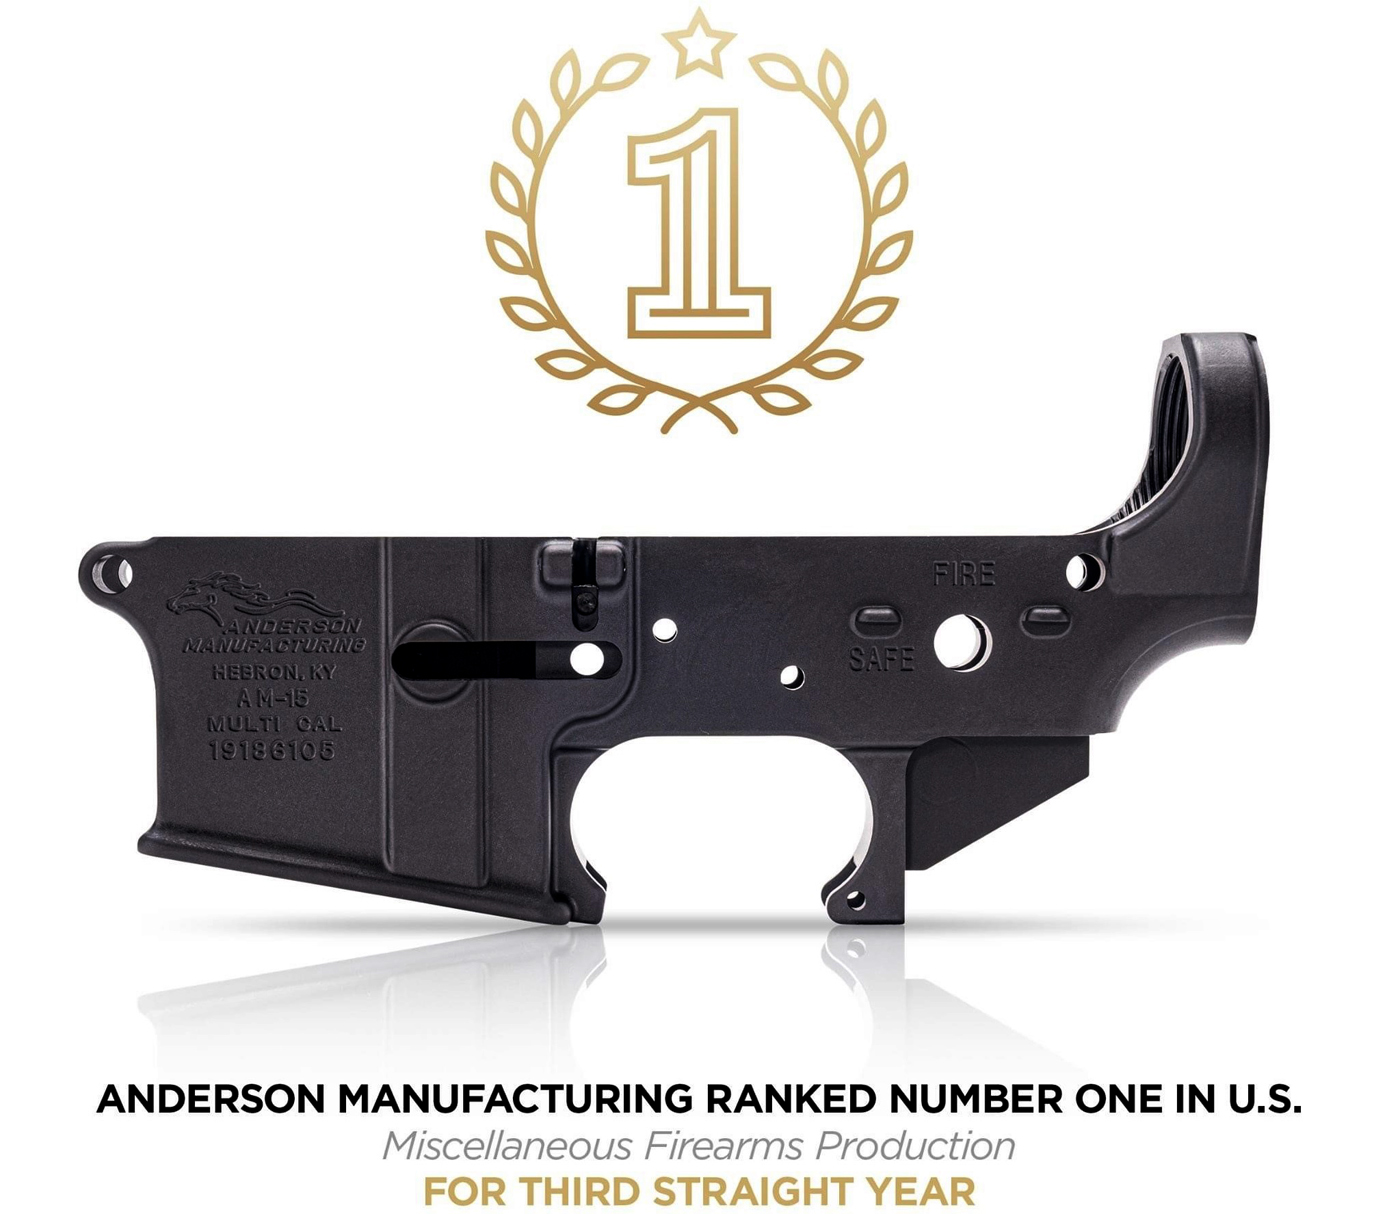 ANDERSON-Stripped-lower-banner-1400